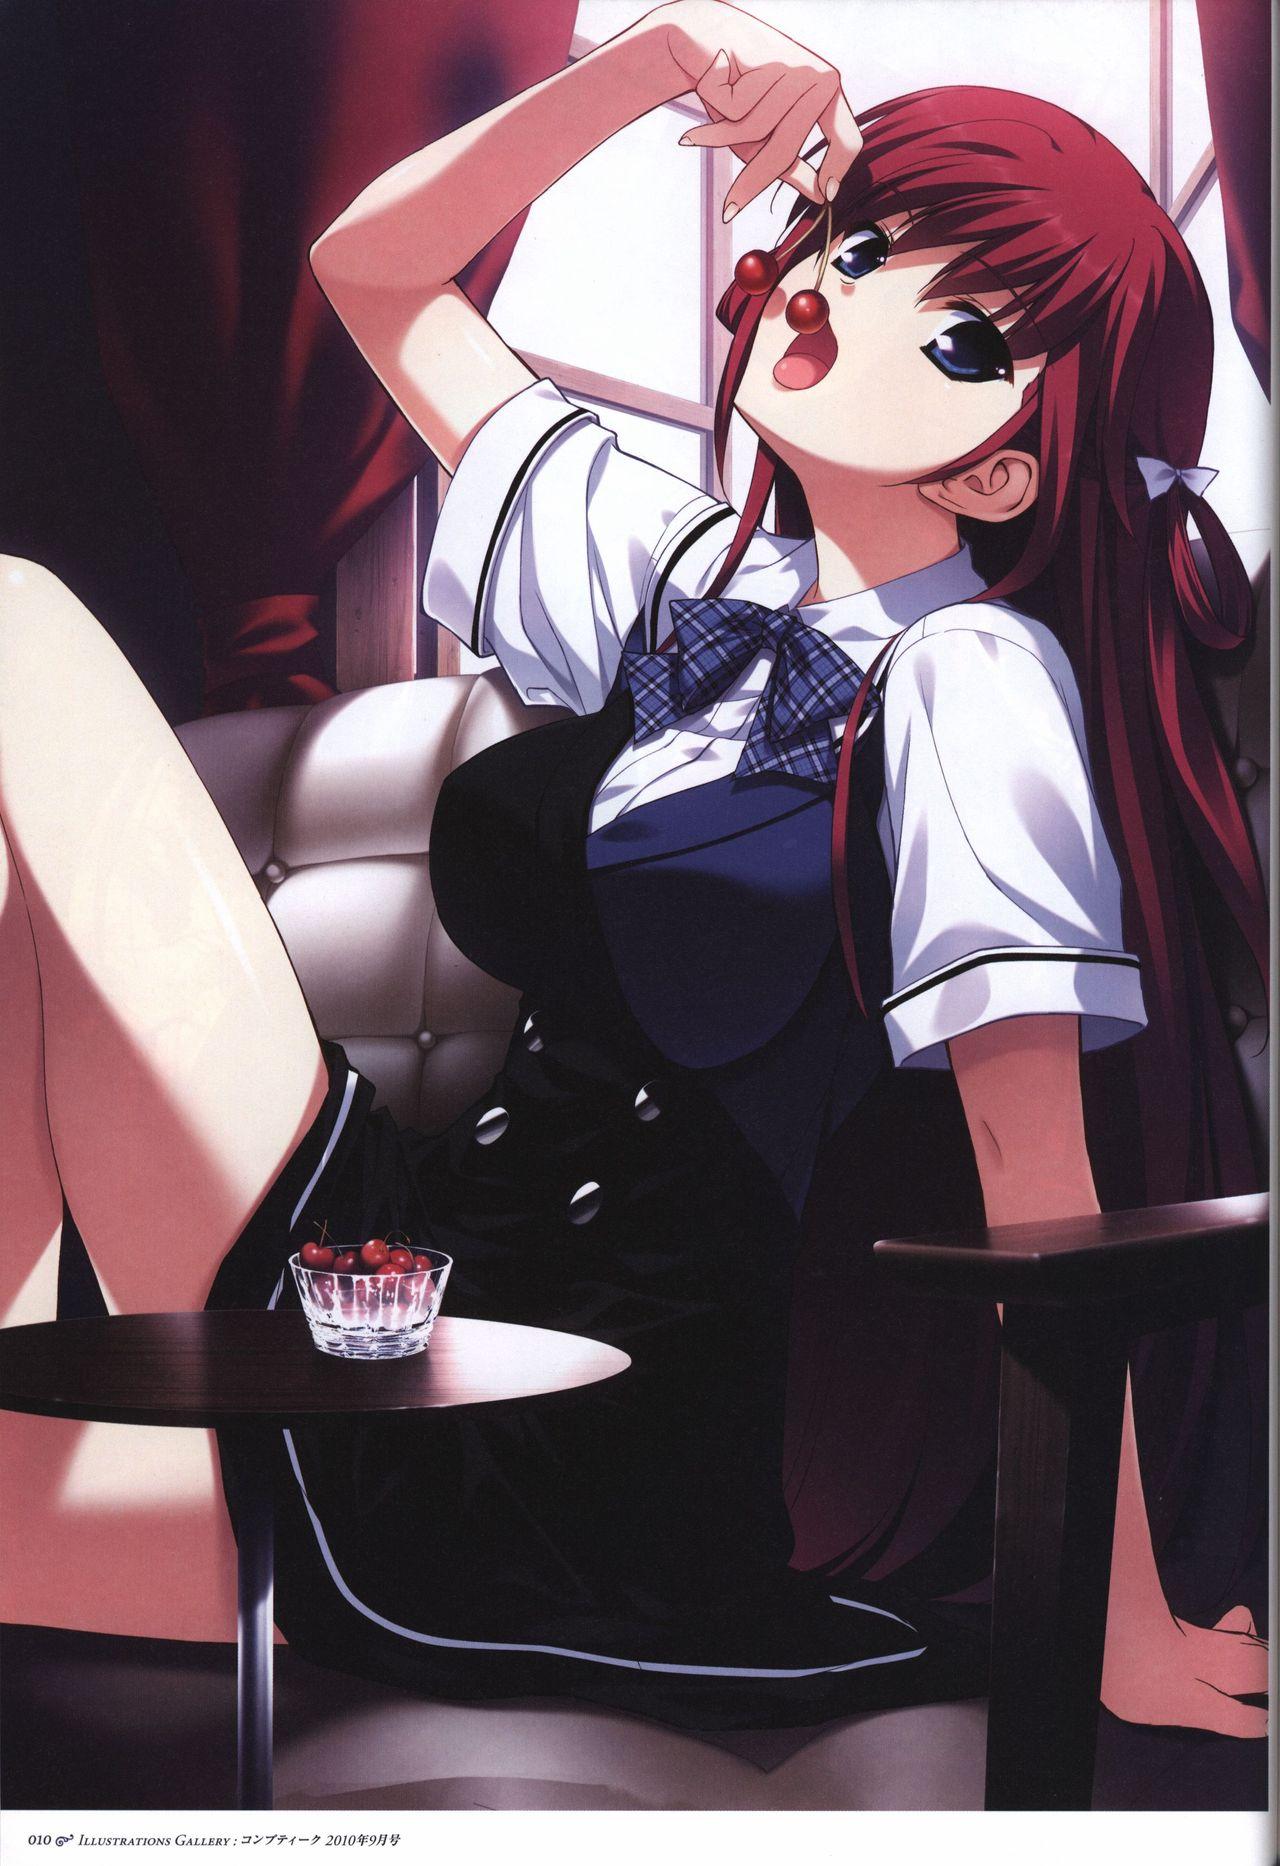 The Fruit of Grisaia Visual FanBook 10